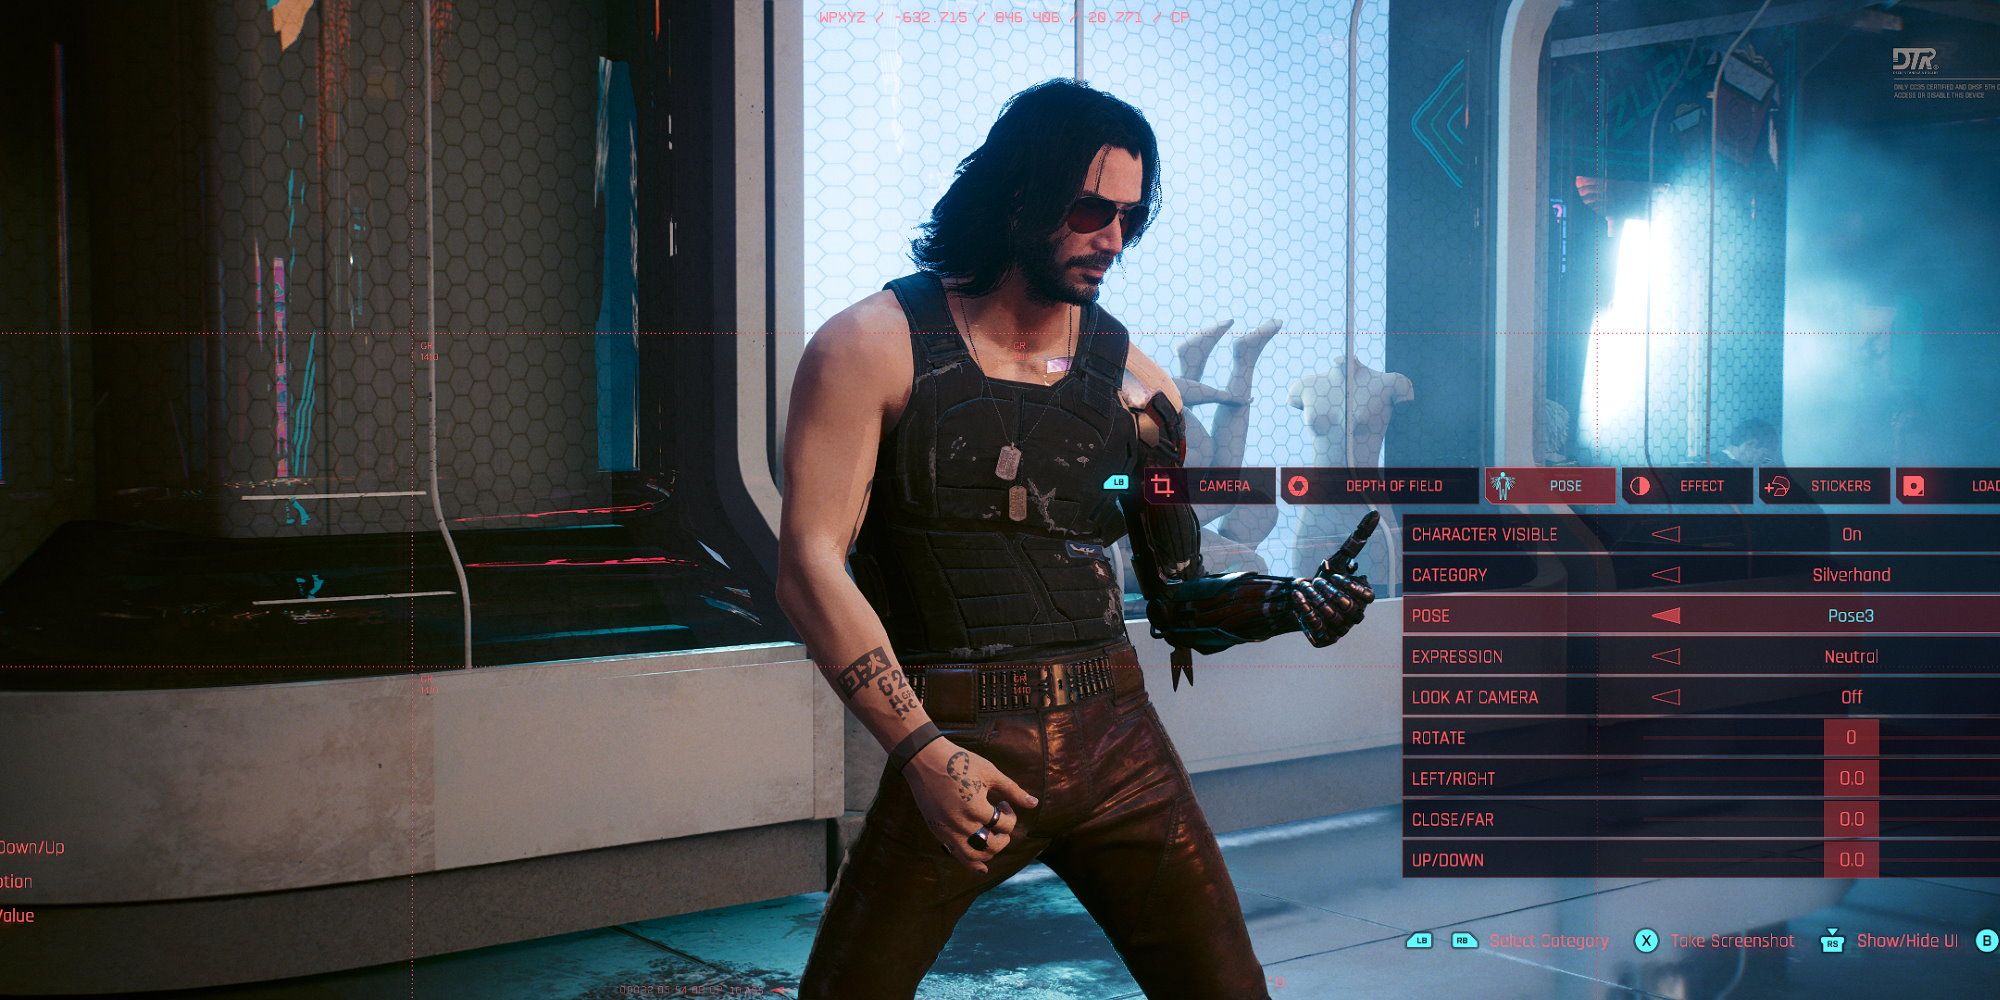 Otis' Injectable Camera+Appearance Menu Mod= gorgeous photos of two pretty  men being fluffy with one another. Getting better at matching poses to  animations and freezing them just right. : r/cyberpunkgame